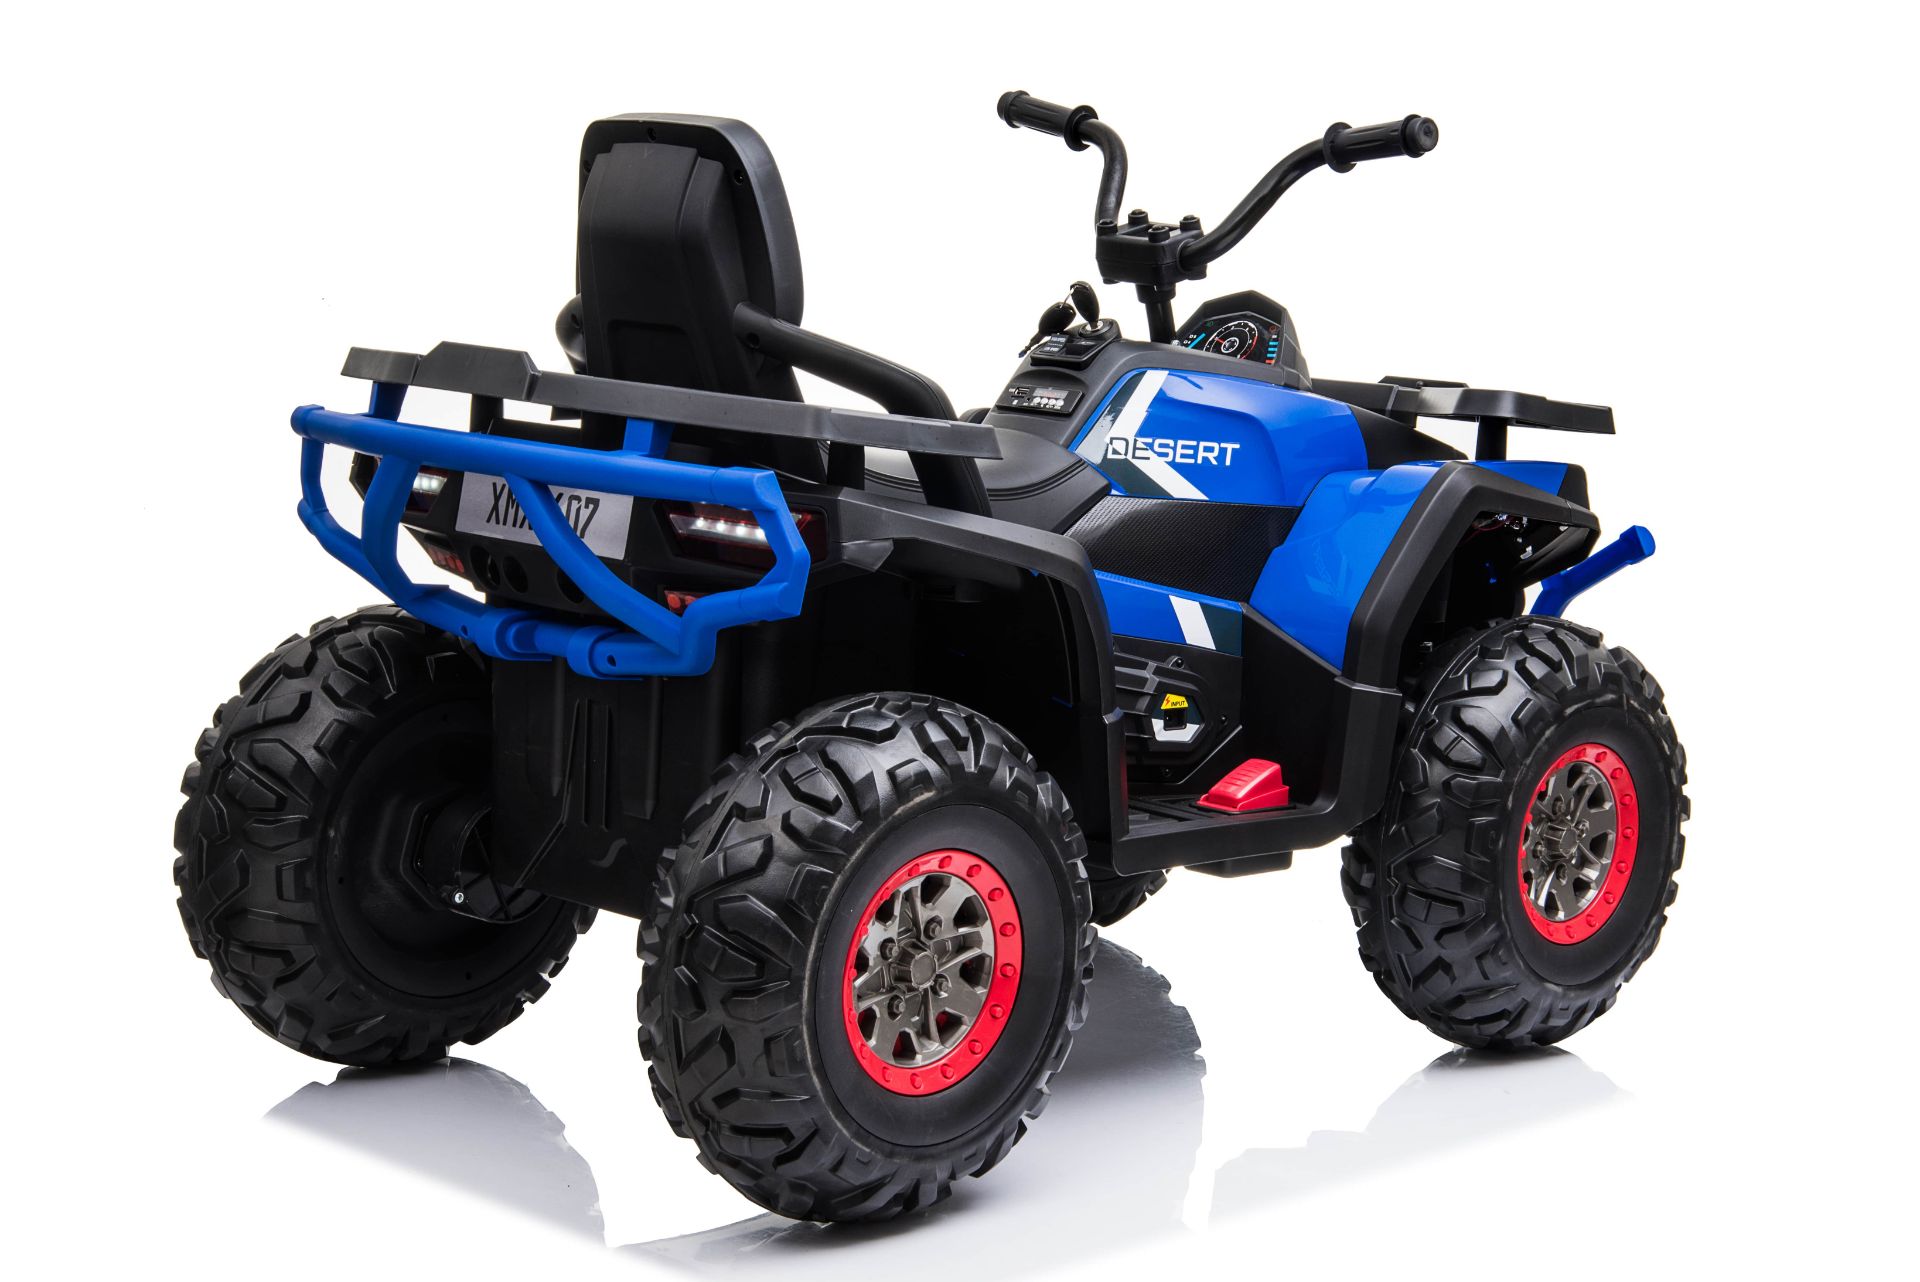 4 x Brand New Ride On Childs Quad Bike 12v with Parental Remote Control - Image 5 of 10